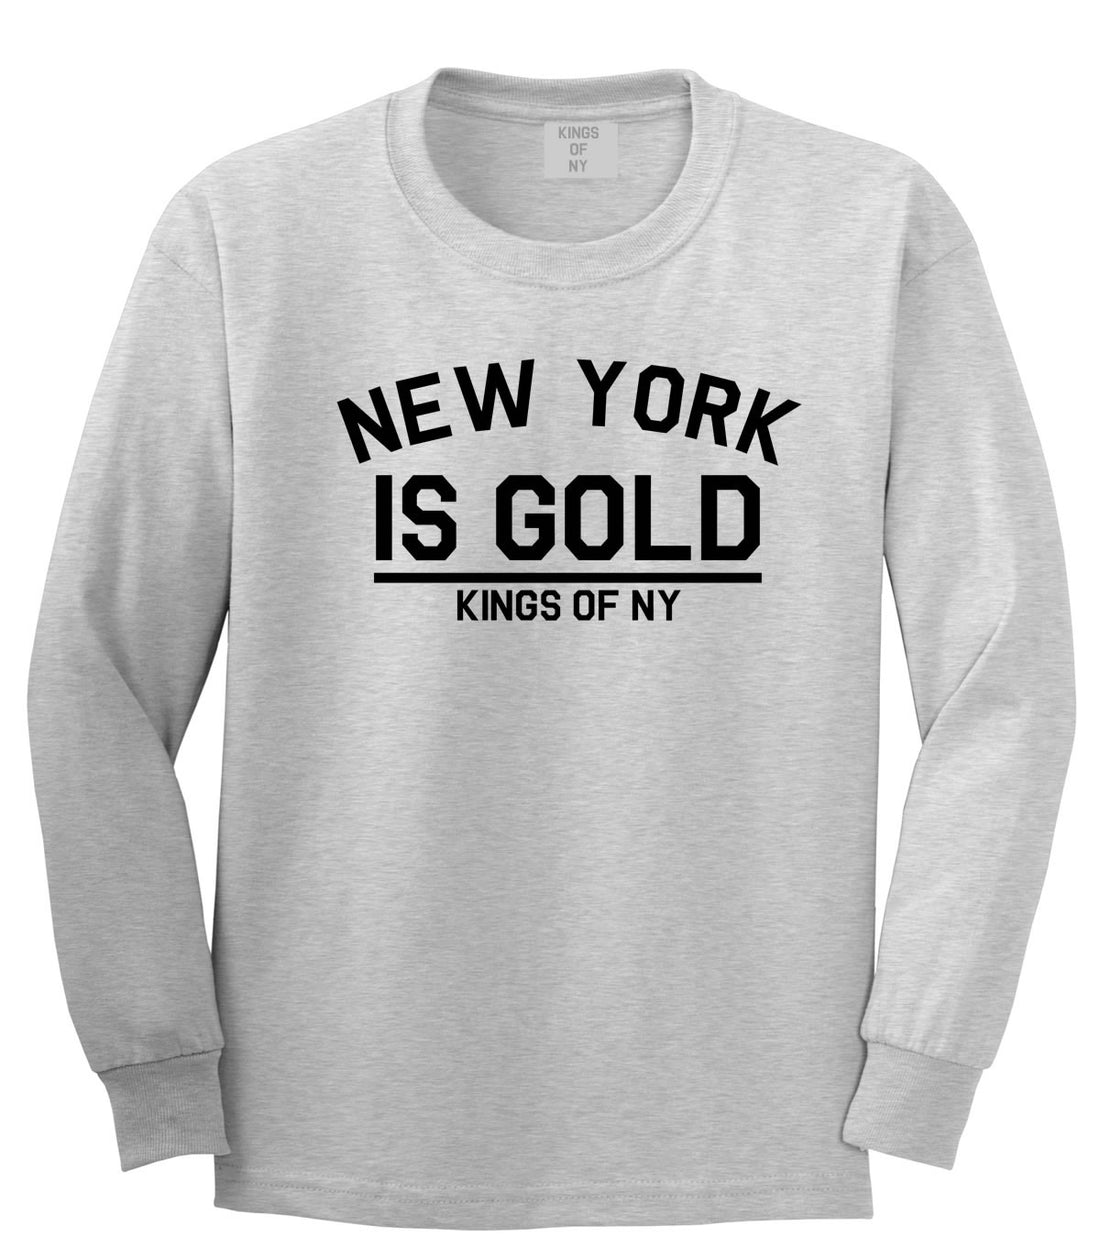 New York Is Gold Long Sleeve T-Shirt in Grey by Kings Of NY